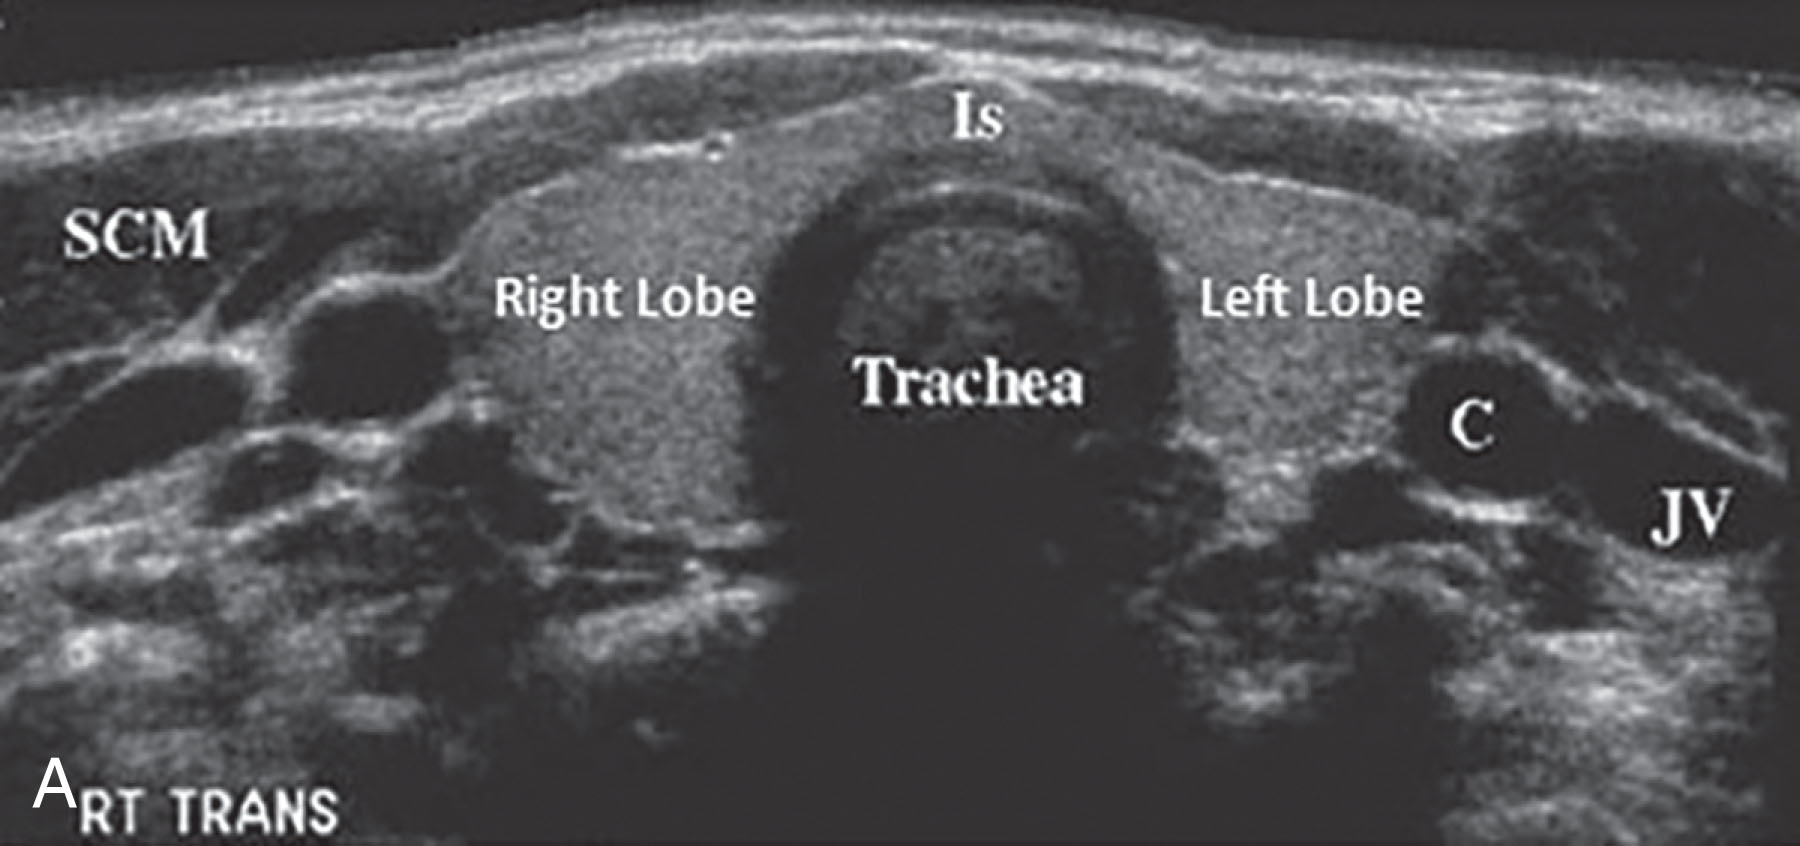 Fig. 22.7, Transverse and longitudinal survey of the isthmus is completed with images recorded and labeled. Transverse imaging landmarks include the trachea (Tr), common carotid artery (CCA), and internal jugular vein (IJV). The trachea is noted in the midline posterior to the isthmus (Is) with posterior shadowing. The common carotid artery is a circular, pulsatile structure directly lateral and adjacent to the gland. The oval-shaped internal jugular vein lies lateral to the common carotid artery. C , Carotid; JV , jugular vein.